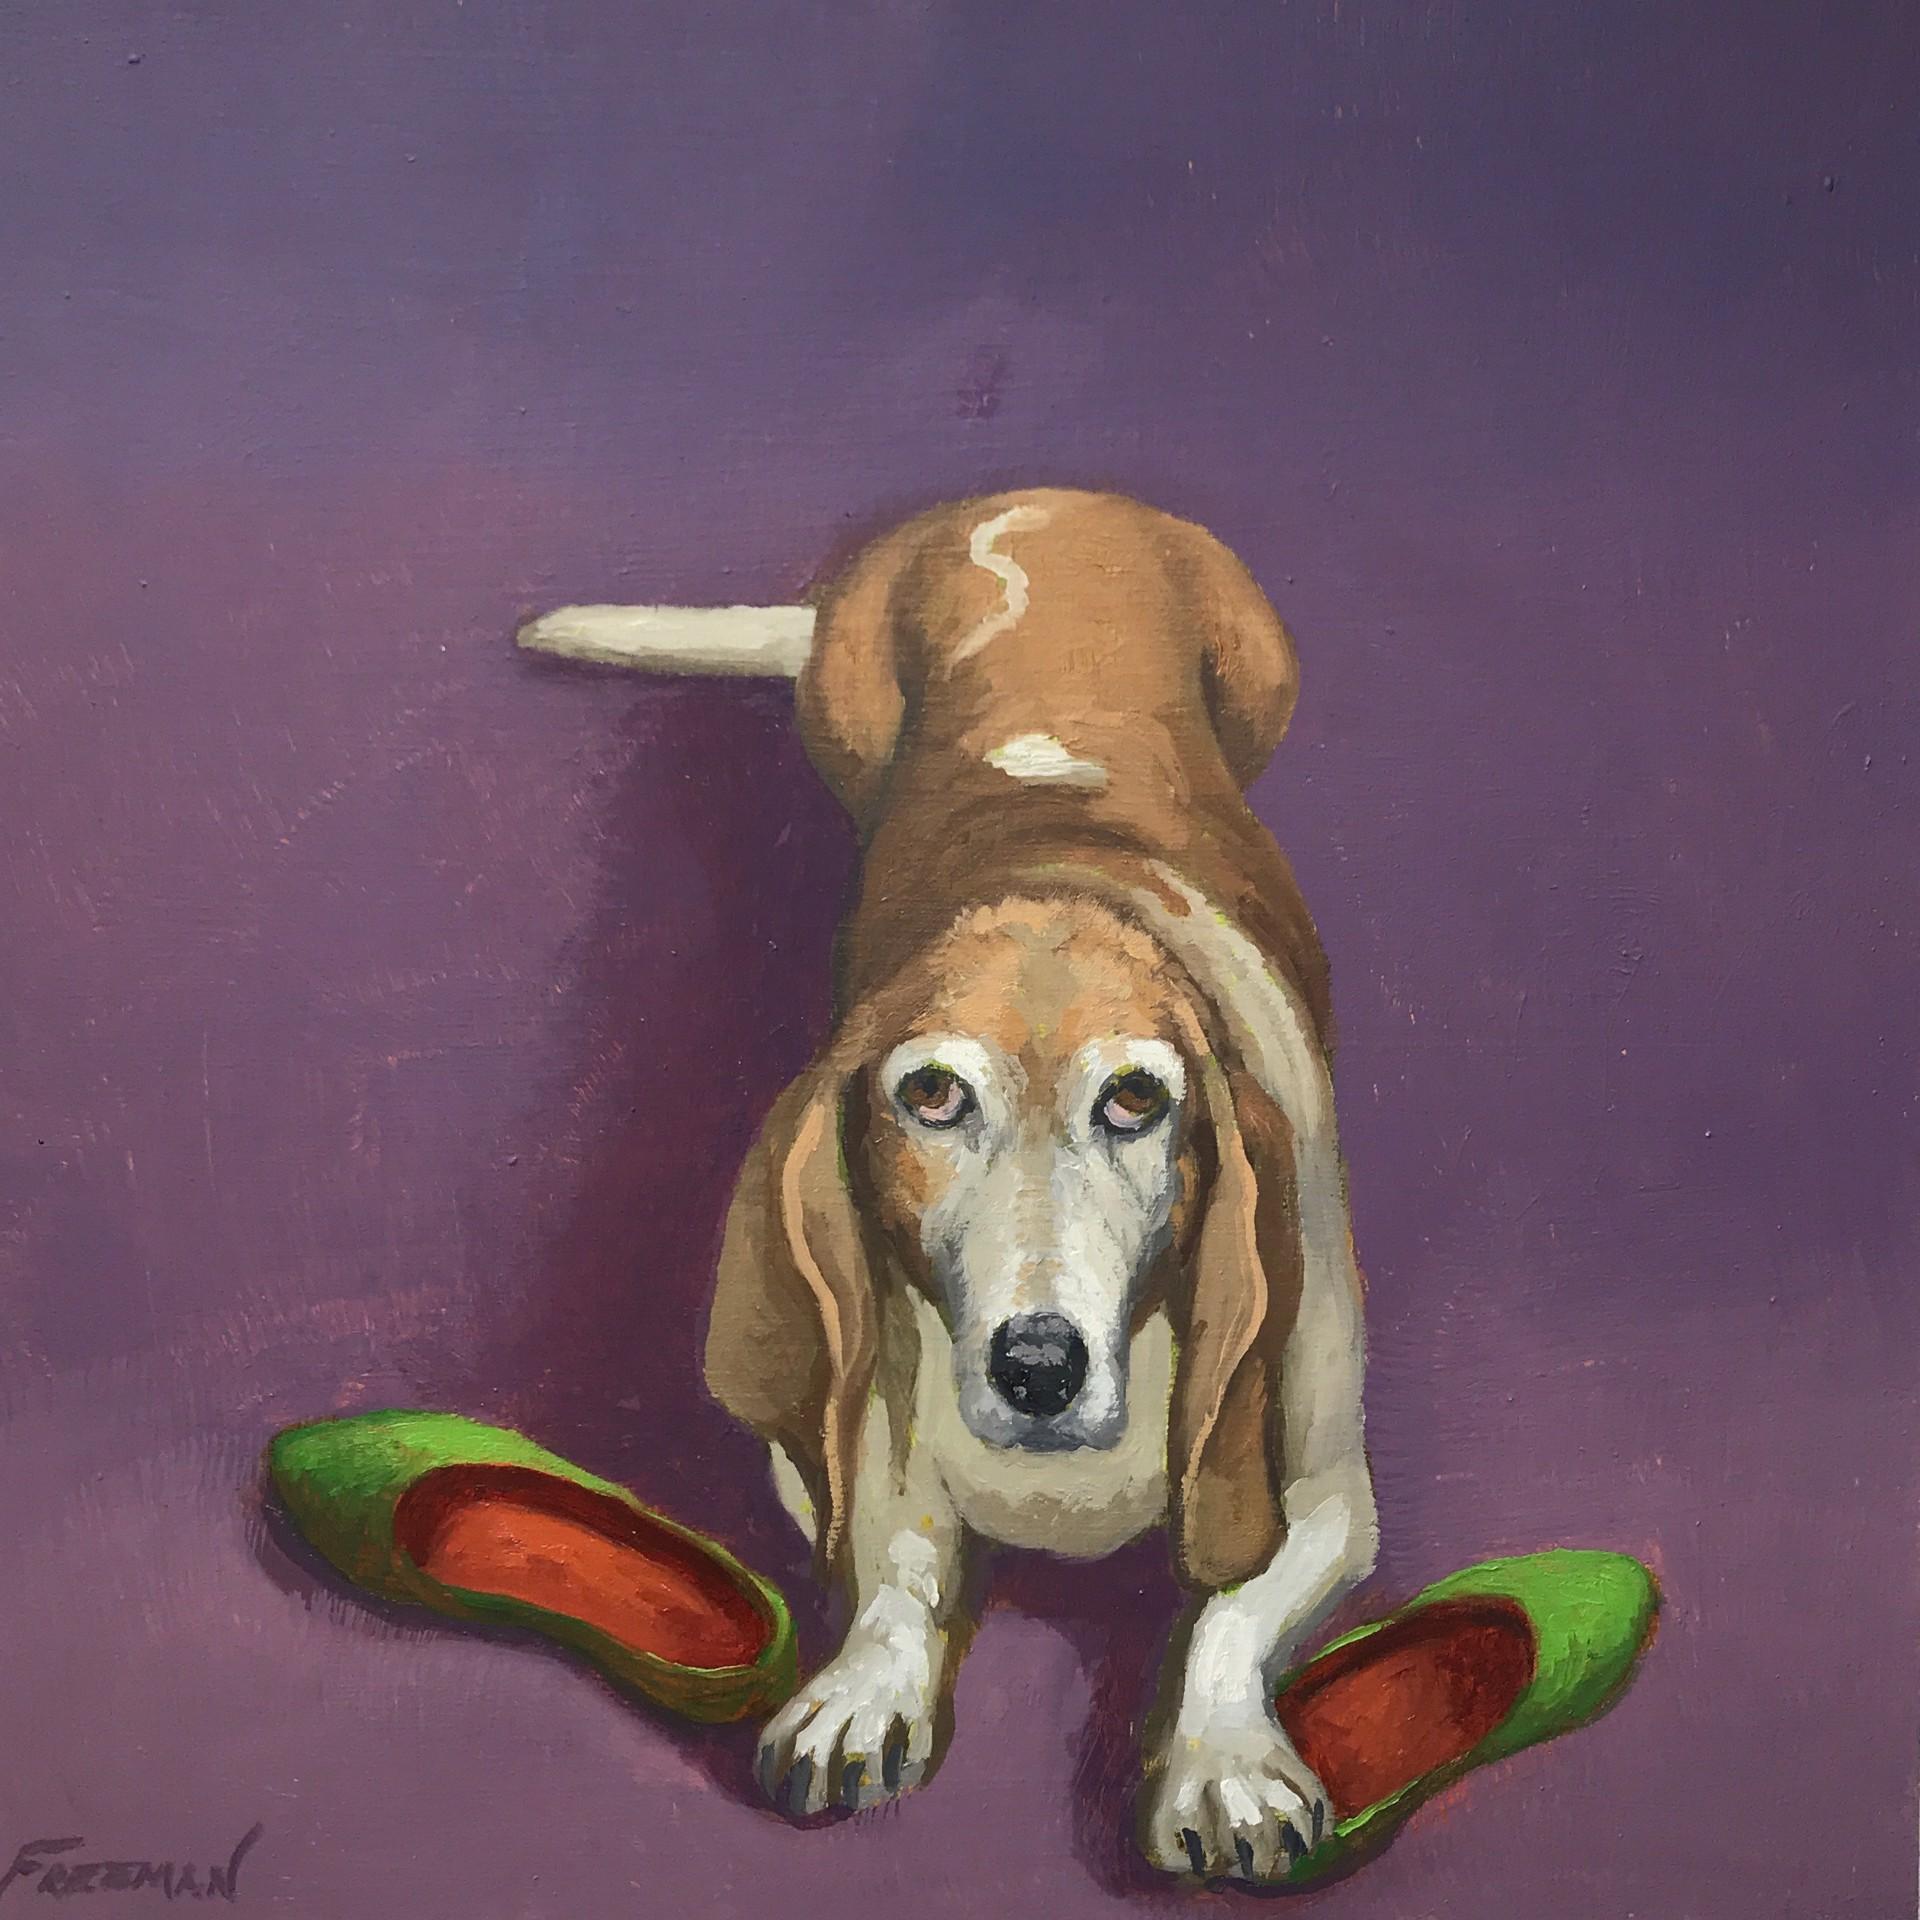 Kathryn Freeman - Basset Hound with Green Slippers For Sale at 1stDibs